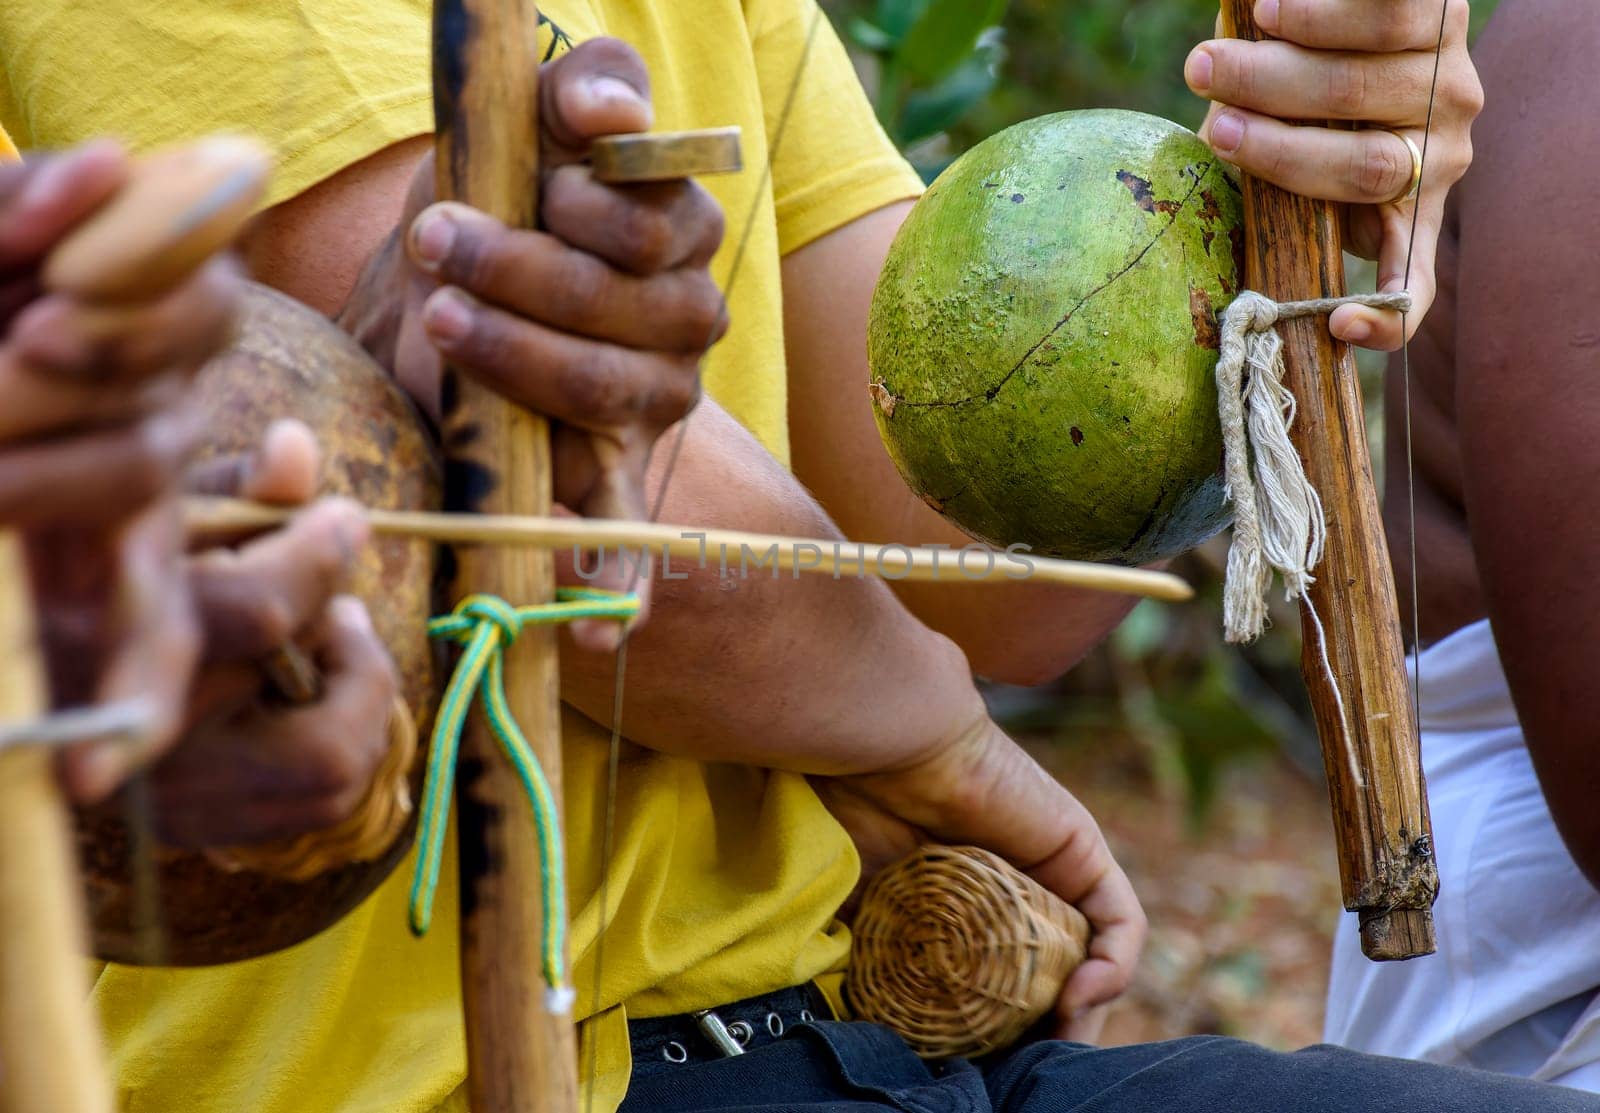 Musicians playing an instrument called berimbau during a capoeira performance in Salvador, Bahia